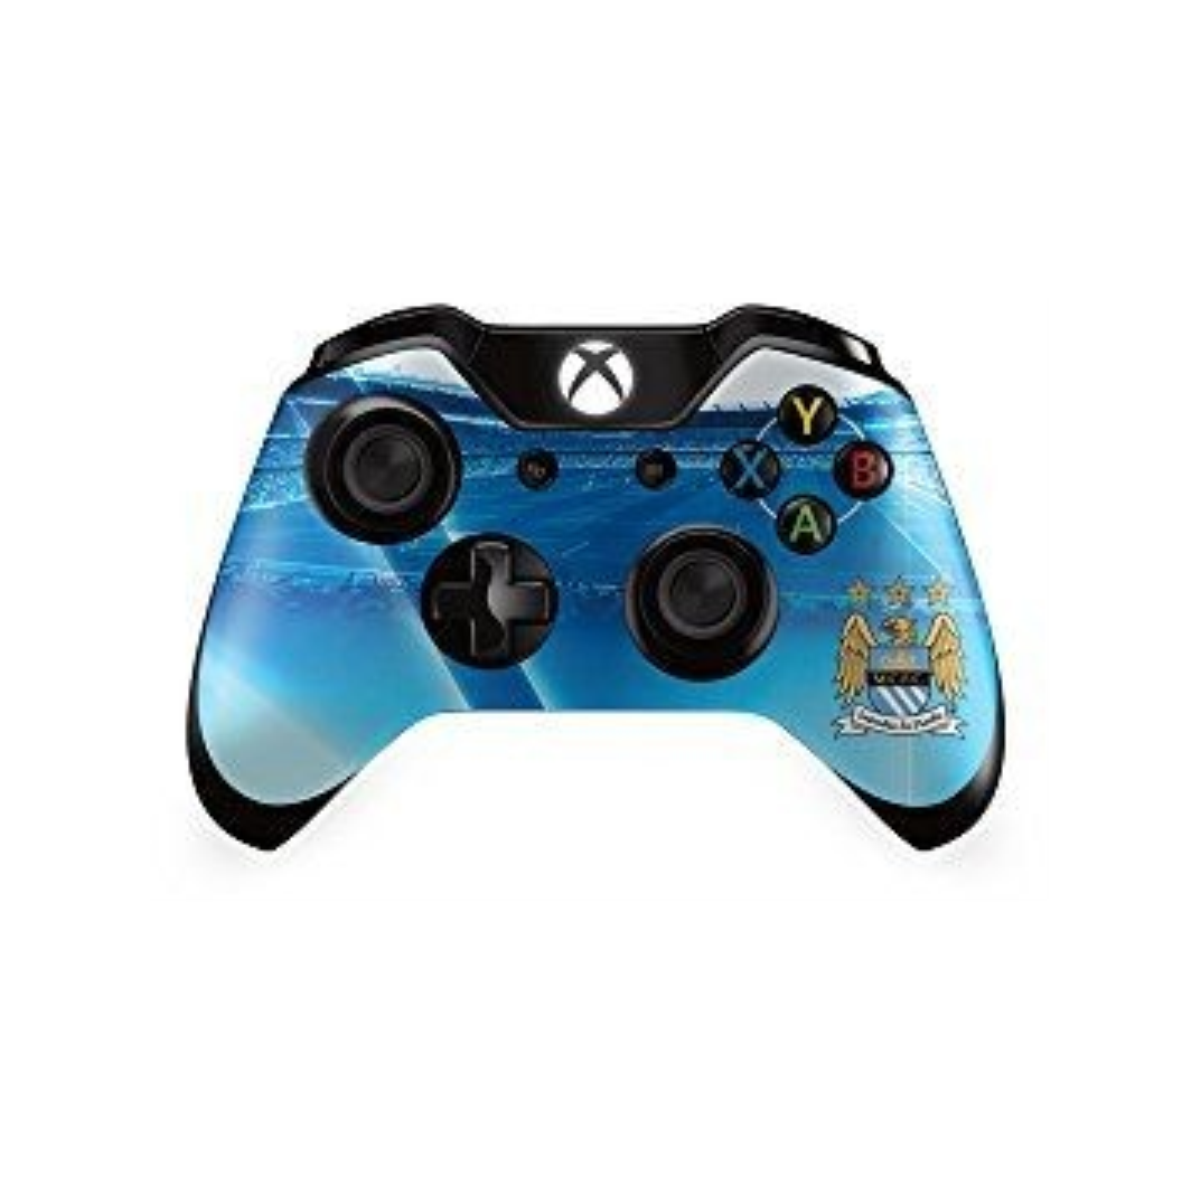 inToro Manchester City FC Skin for Xbox One Controller